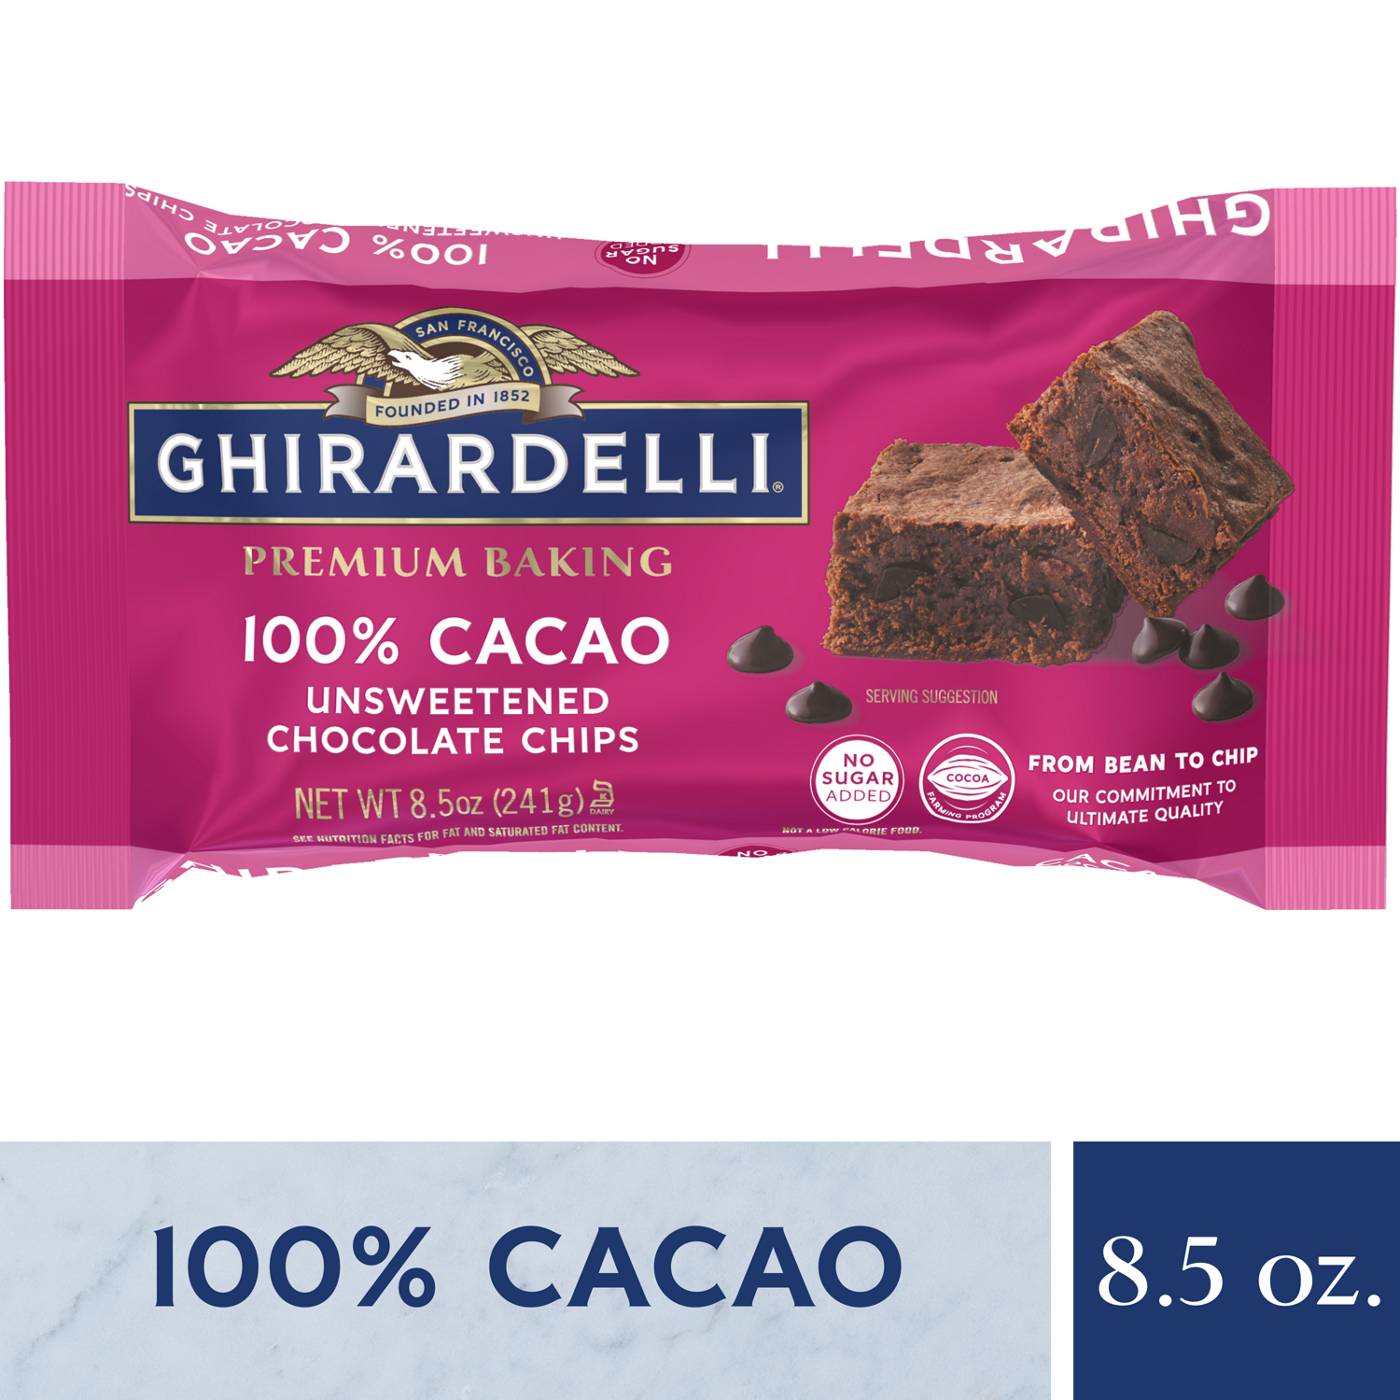 Ghirardelli 100% Cacao Unsweetened Chocolate Chips for Baking, Premium Baking Chips; image 6 of 7